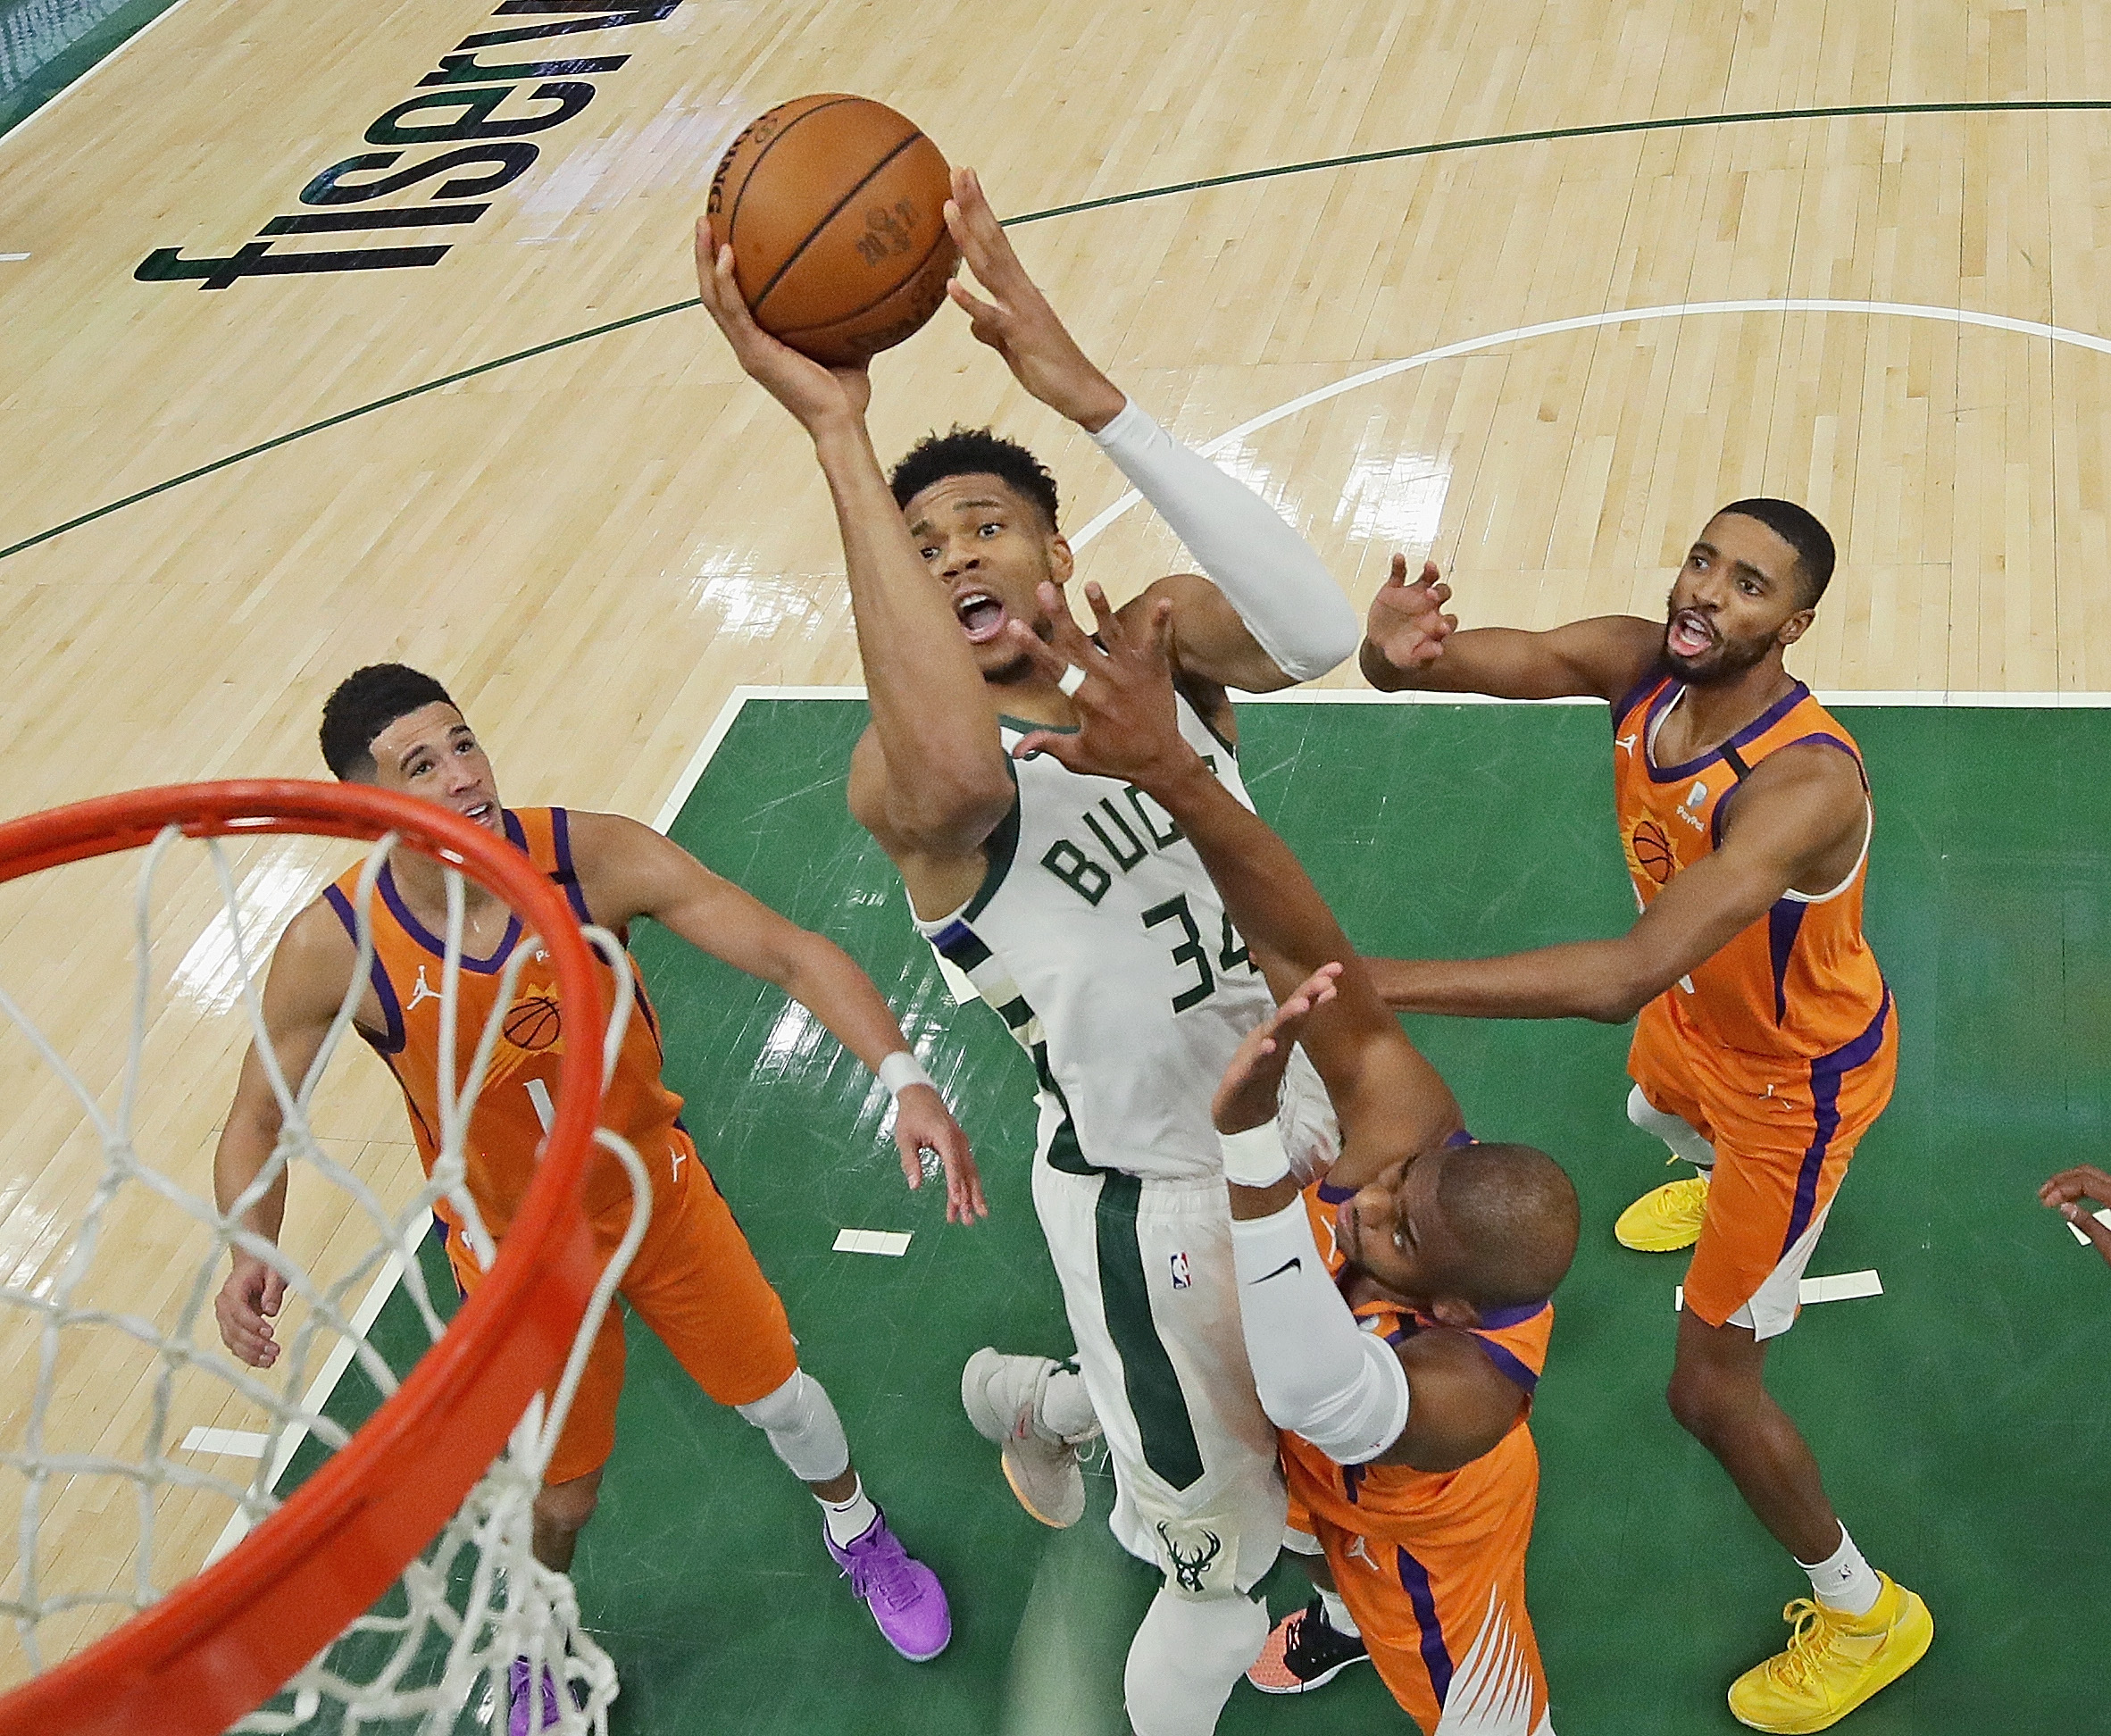 Giannis Antetokounmpo takes a shot in Game 4 of the NBA Finals.